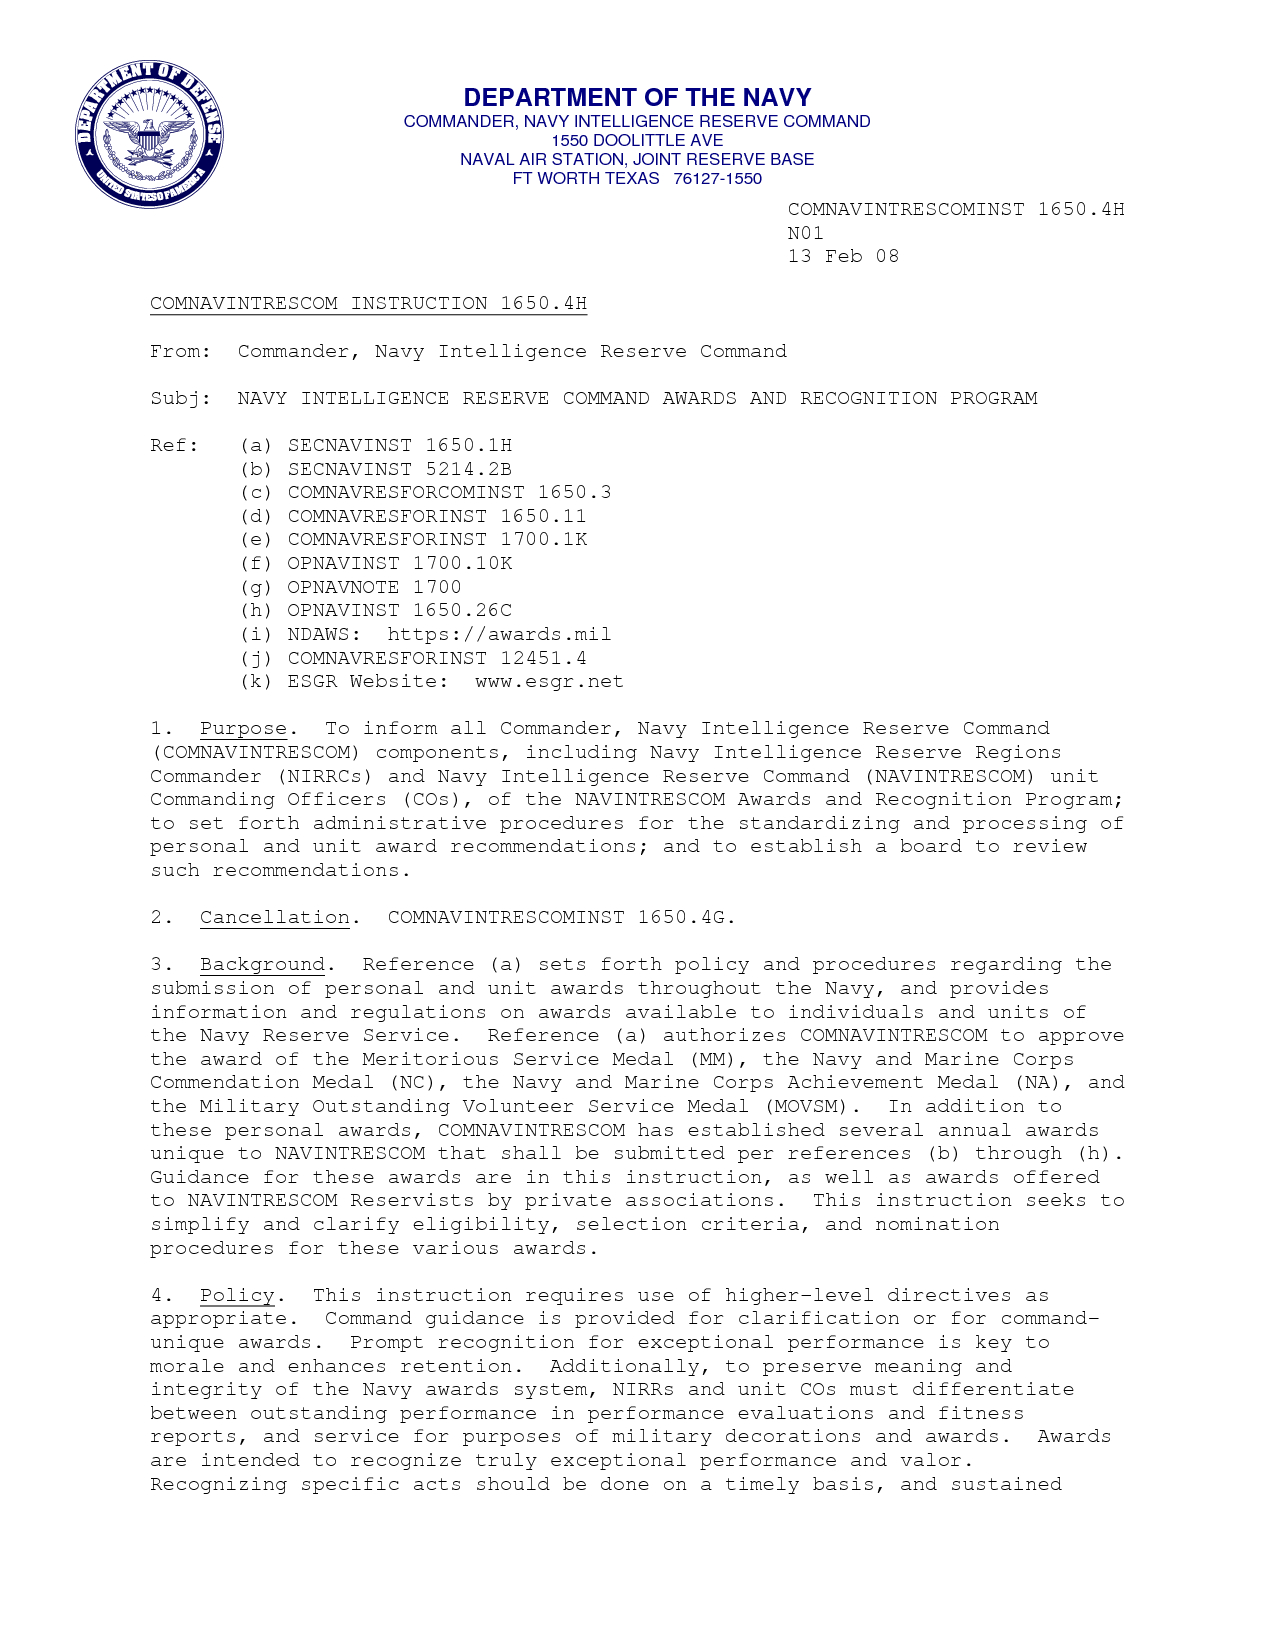 10 Best Photos Of Navy Correspondence Manual Memo Format With Regard To Department Of The Navy Letterhead Template